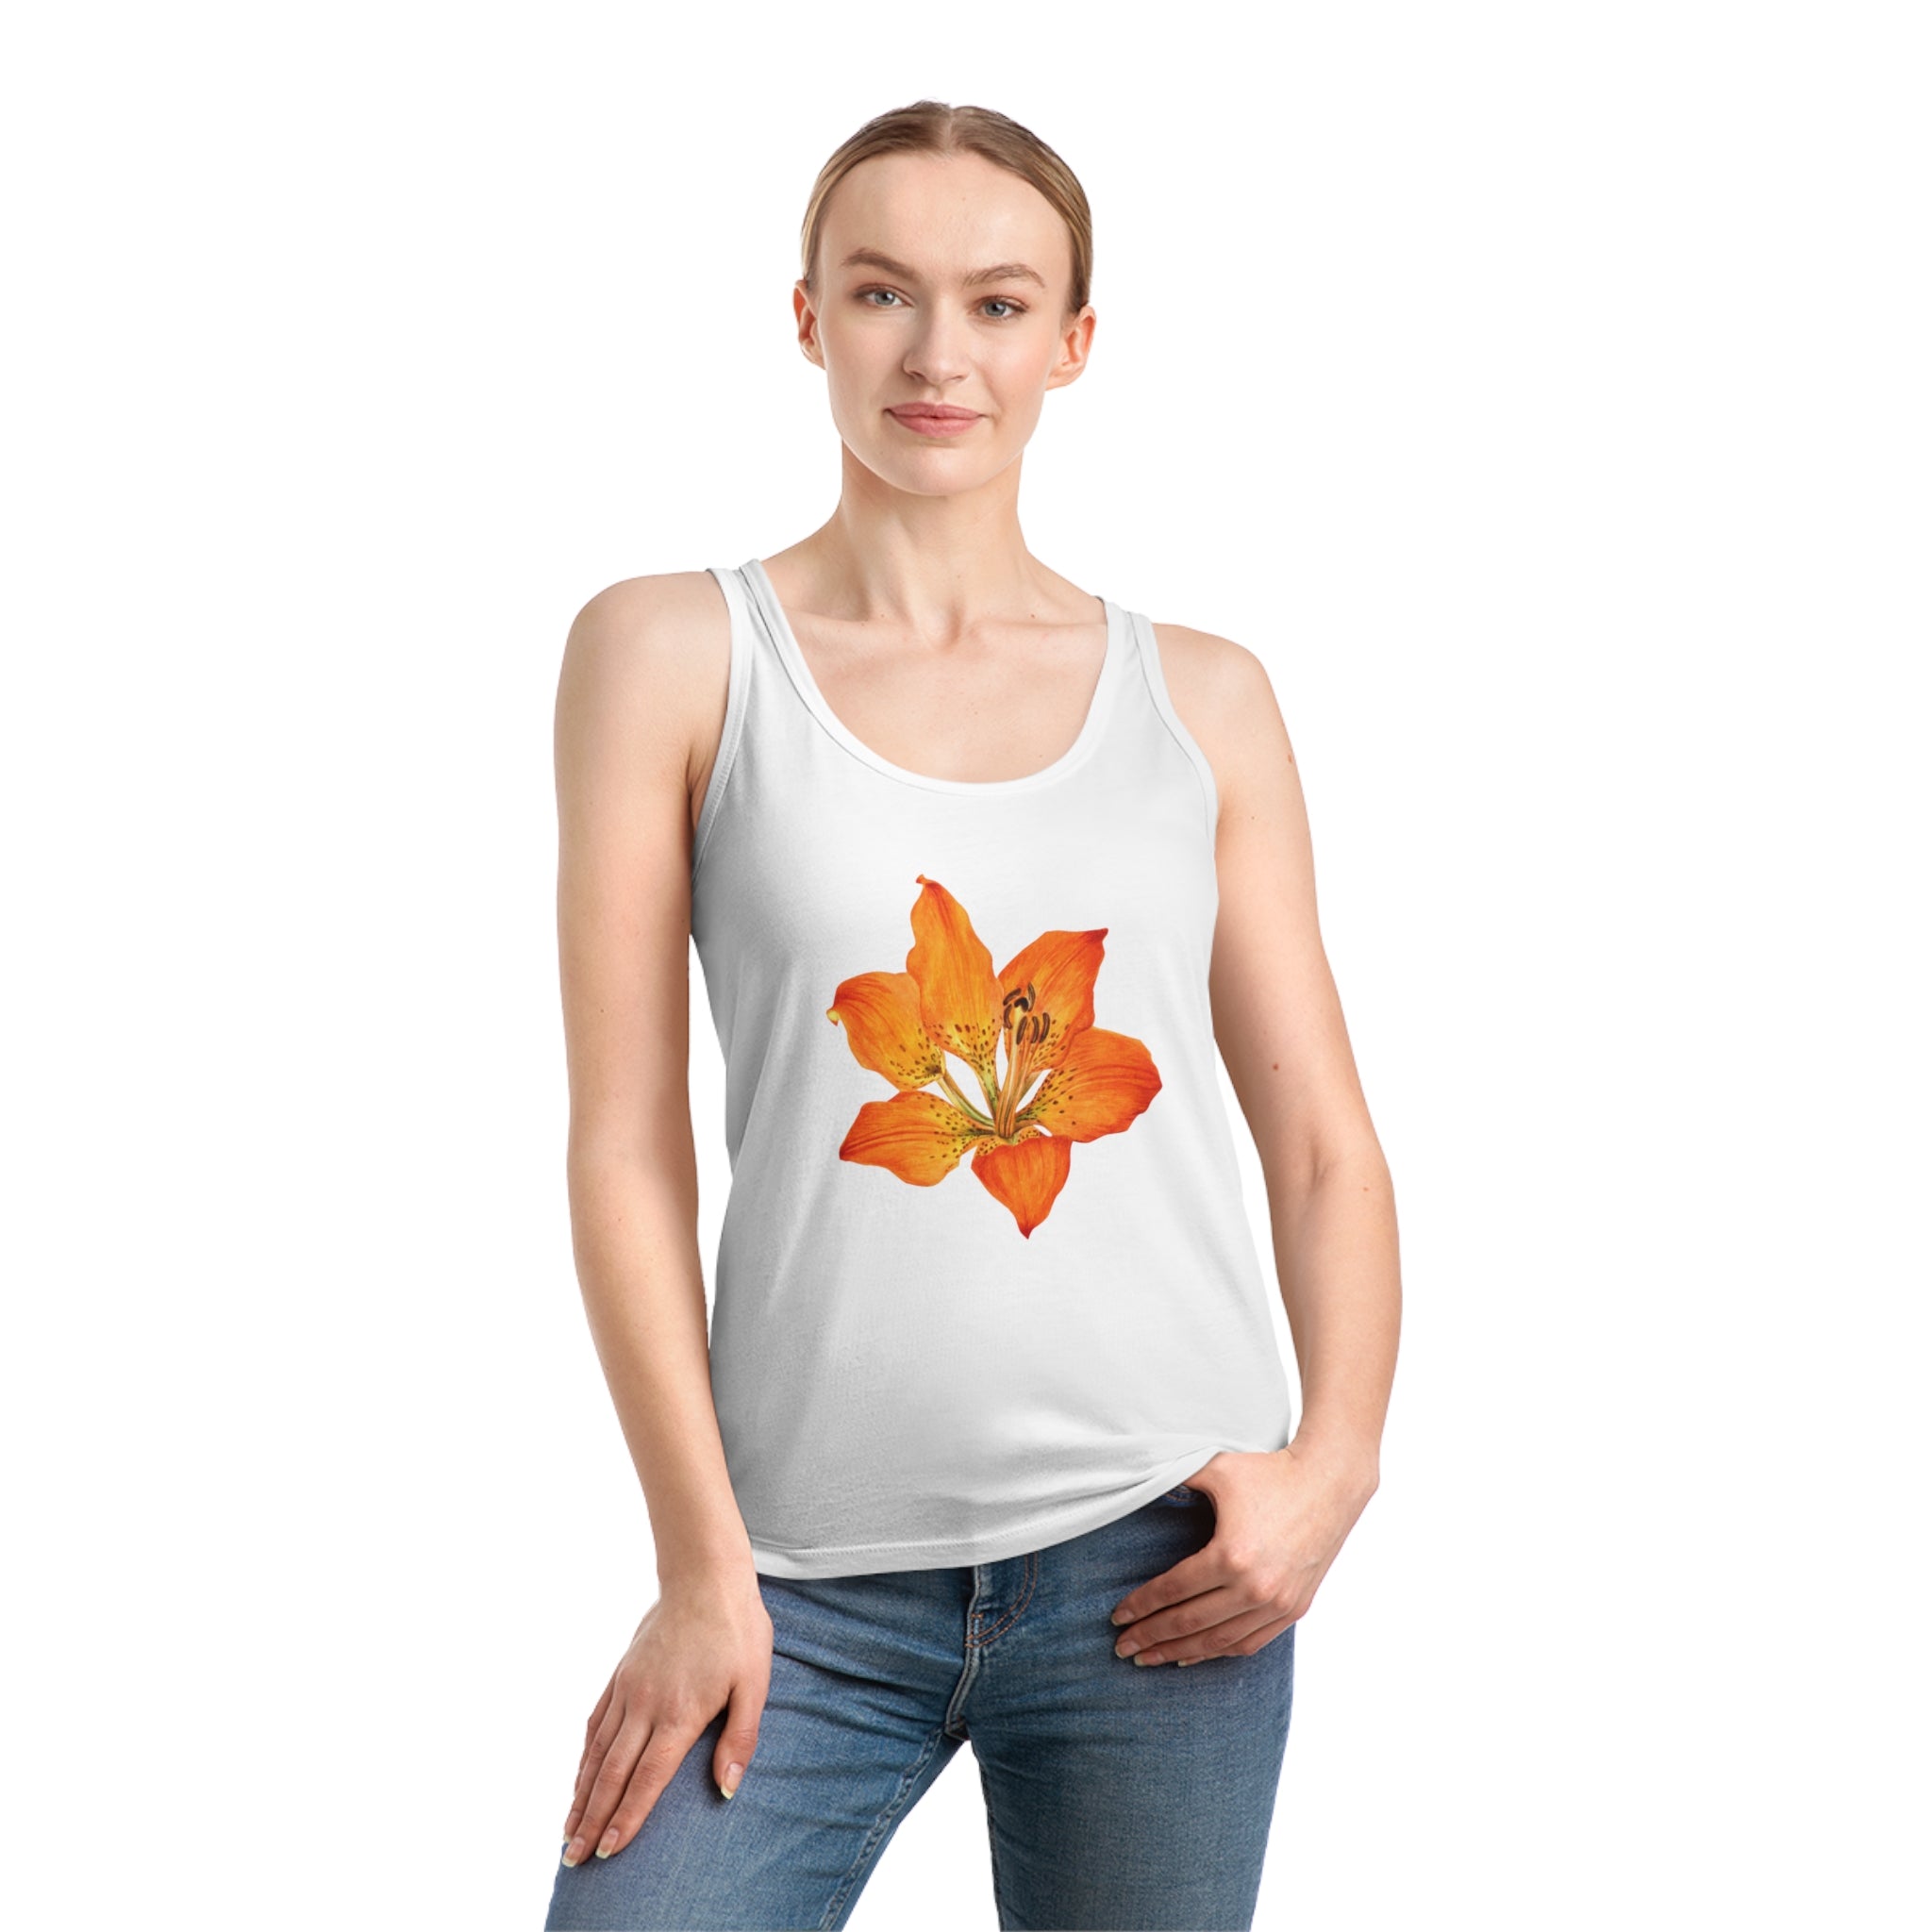 Flower Boom Tank Top with floral print.